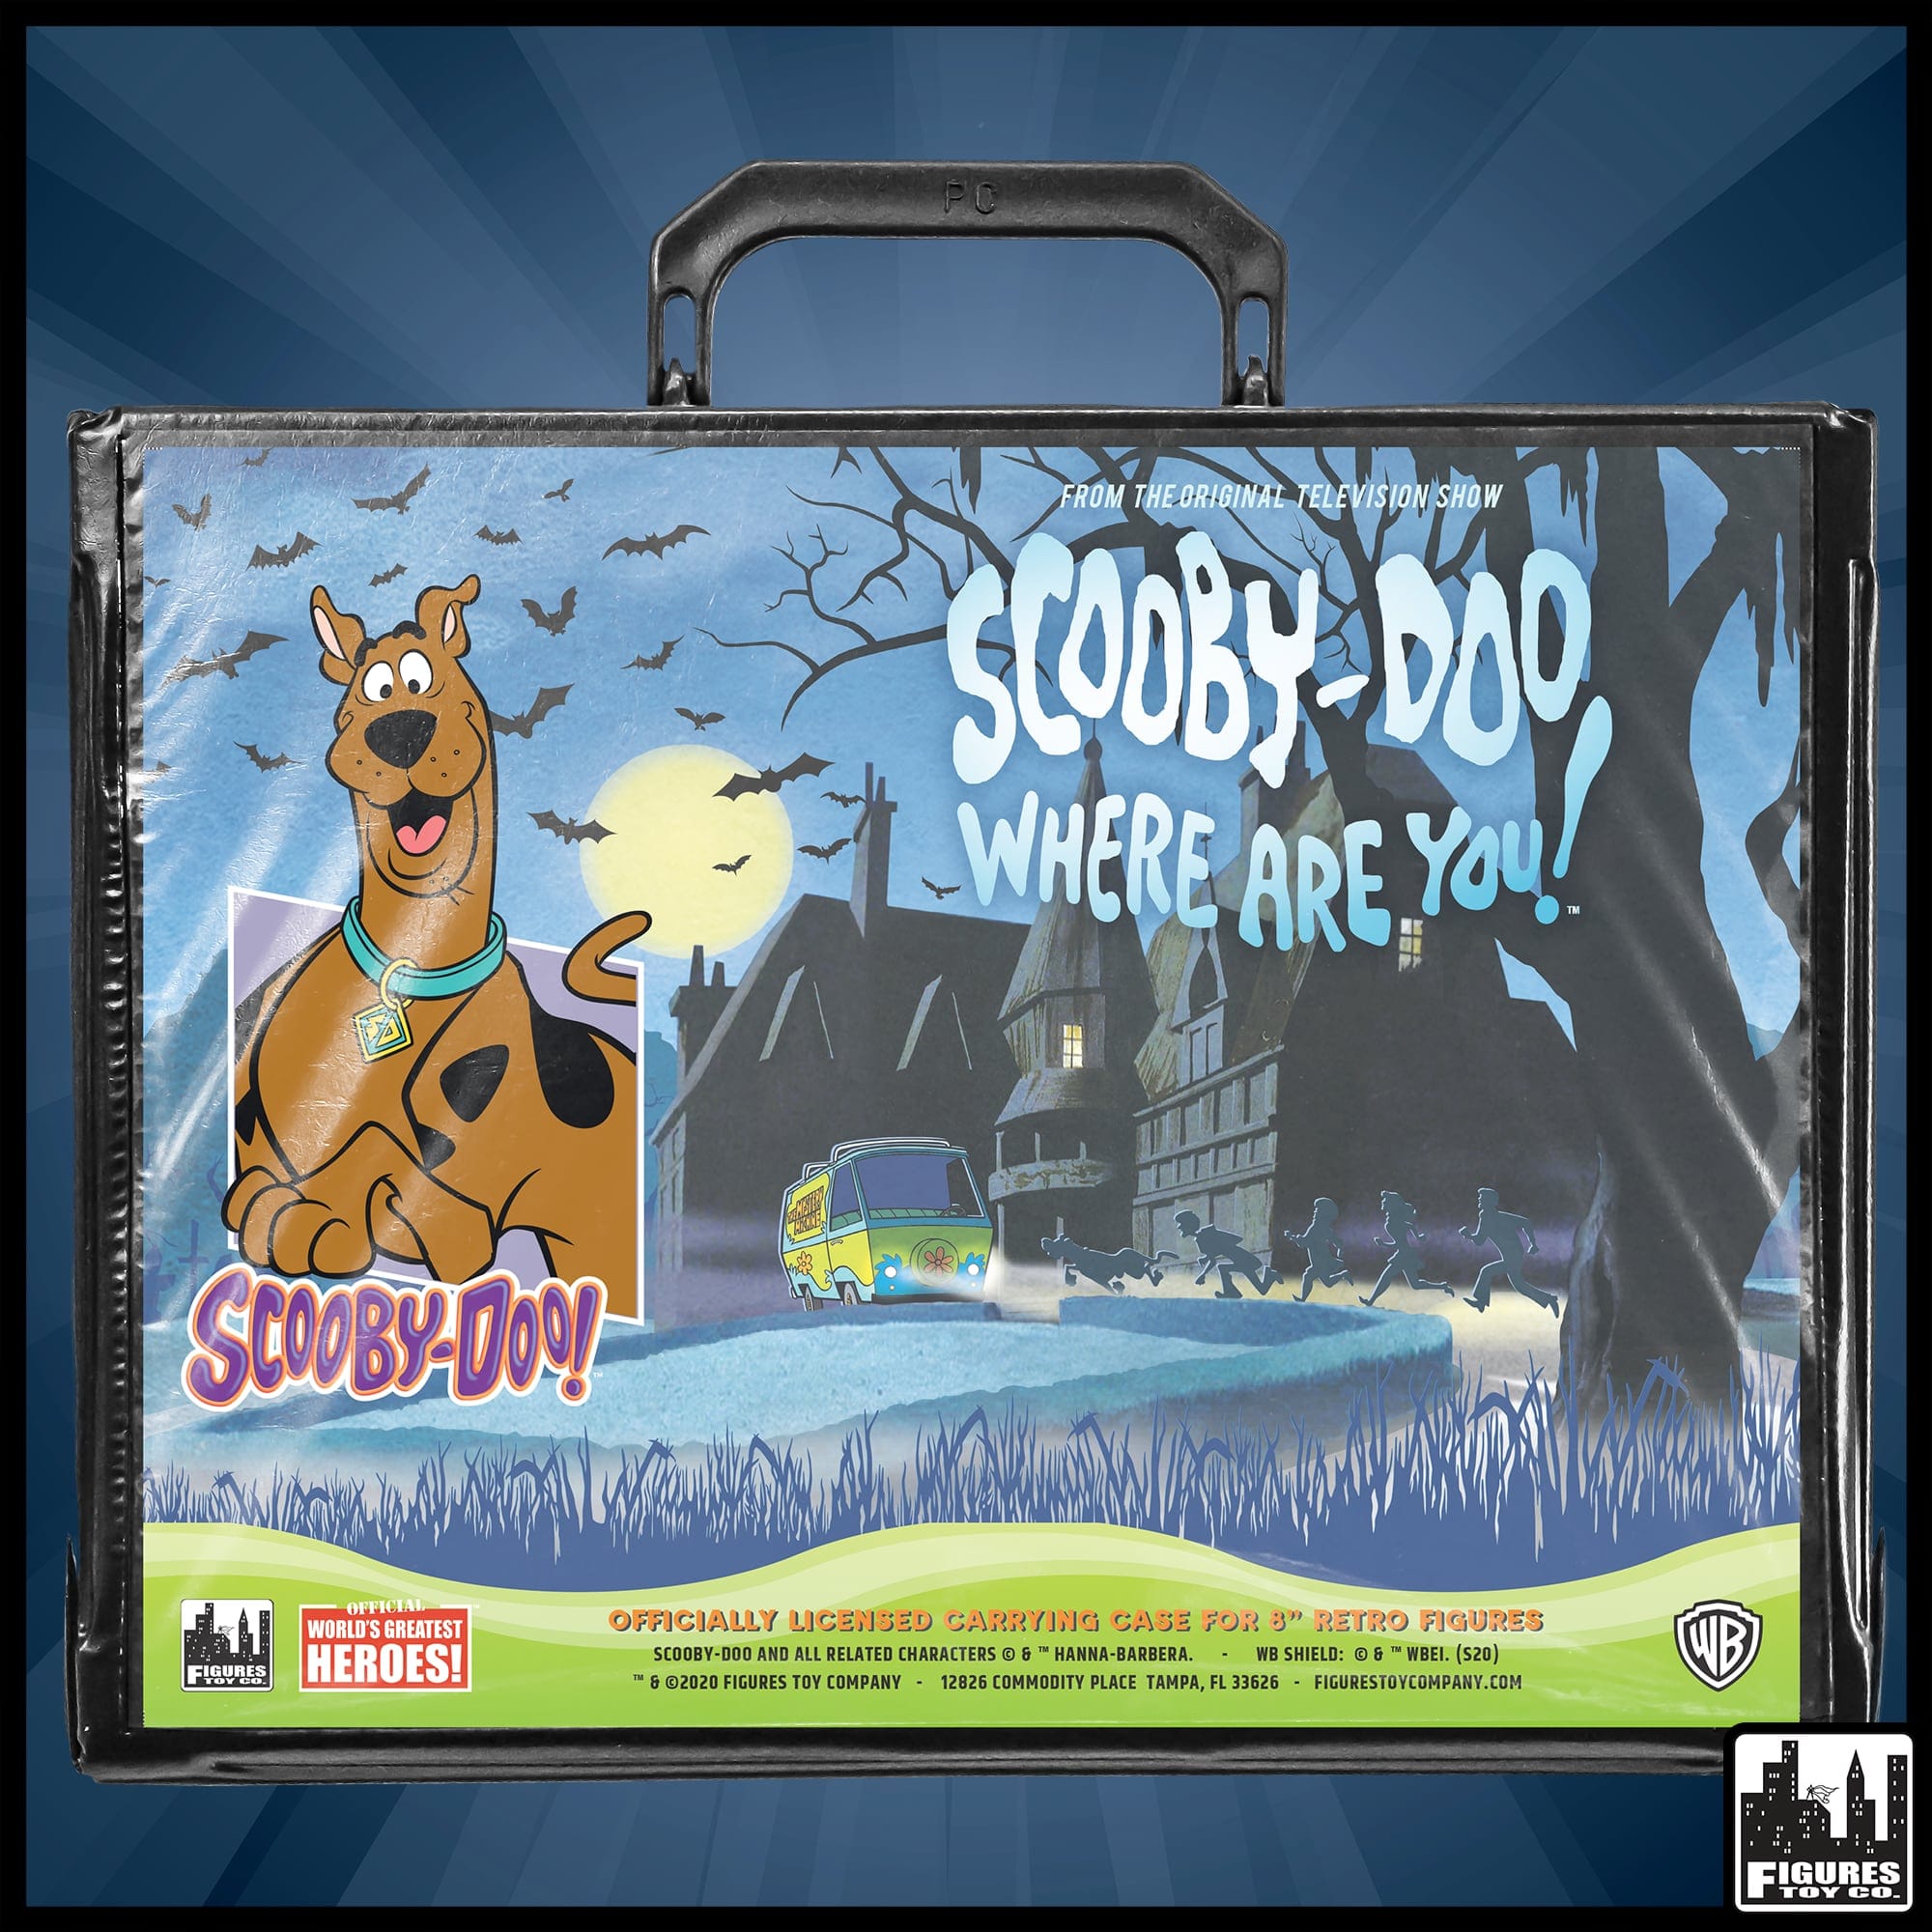 Scooby Doo Action Figure Carrying Case